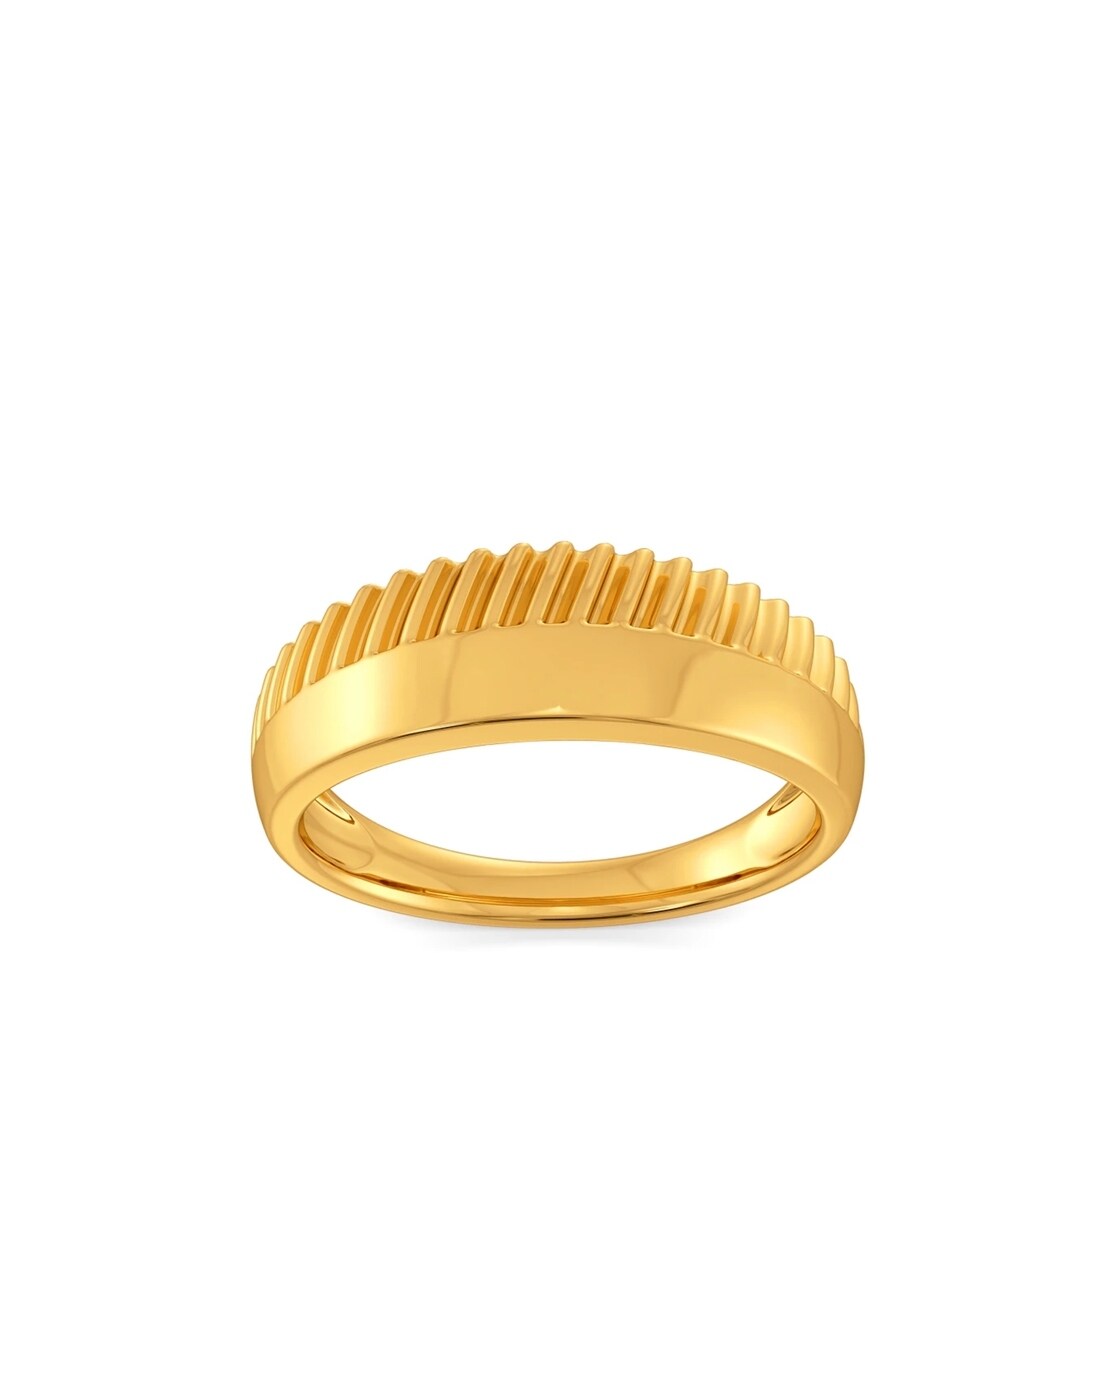 Elephant Hair Ring  Gold Rings Fashion  Elephant Tail Ring  AJS  Mens gold  ring vintage Gold rings fashion Elephant hair jewelry